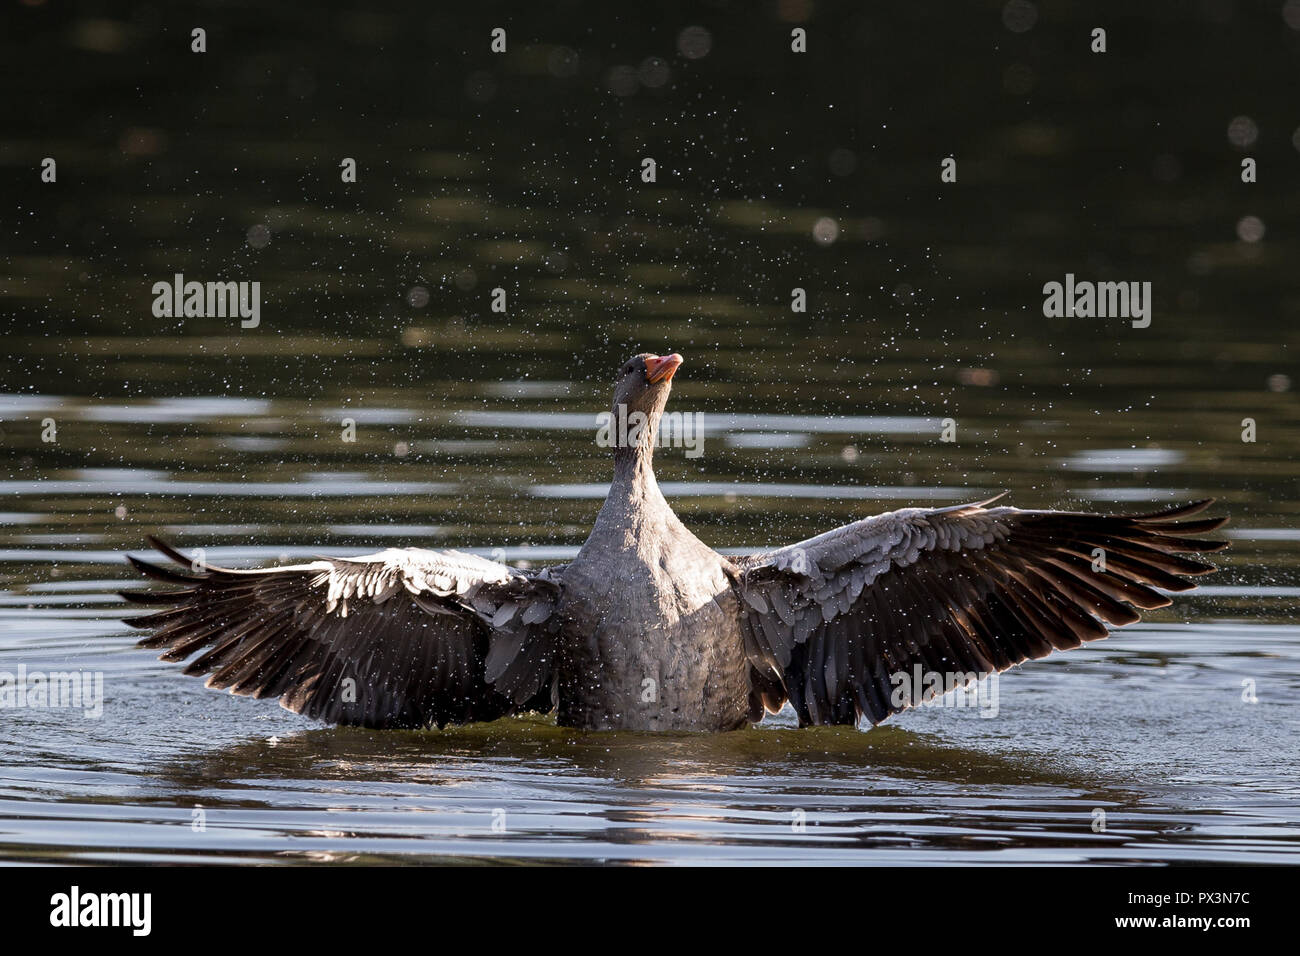 Clumber Park, Worksop, Nottinghamshire, UK. Friday 19th October 2018. A Greylag Goose shakes water off its wings at Clumber Park, Worksop, Nottinghamshire, UK. Credit: UK Sports Agency/Alamy Live News Stock Photo